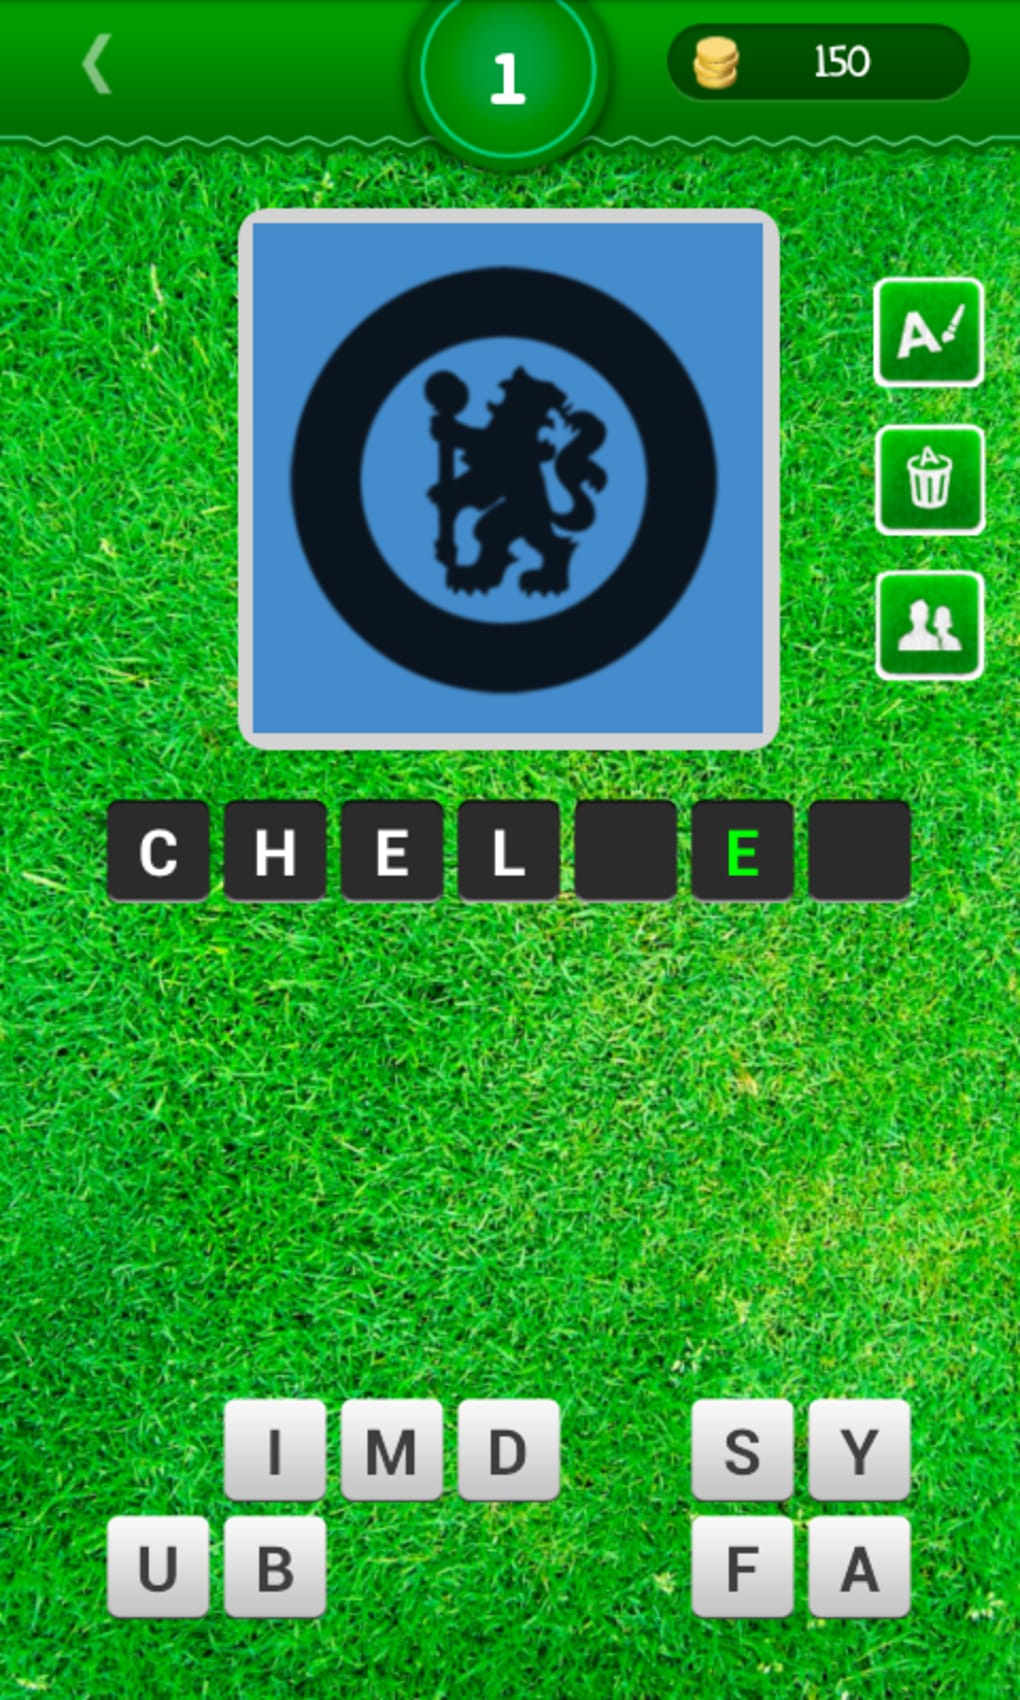 can you guess these football Clubs? - PART 2